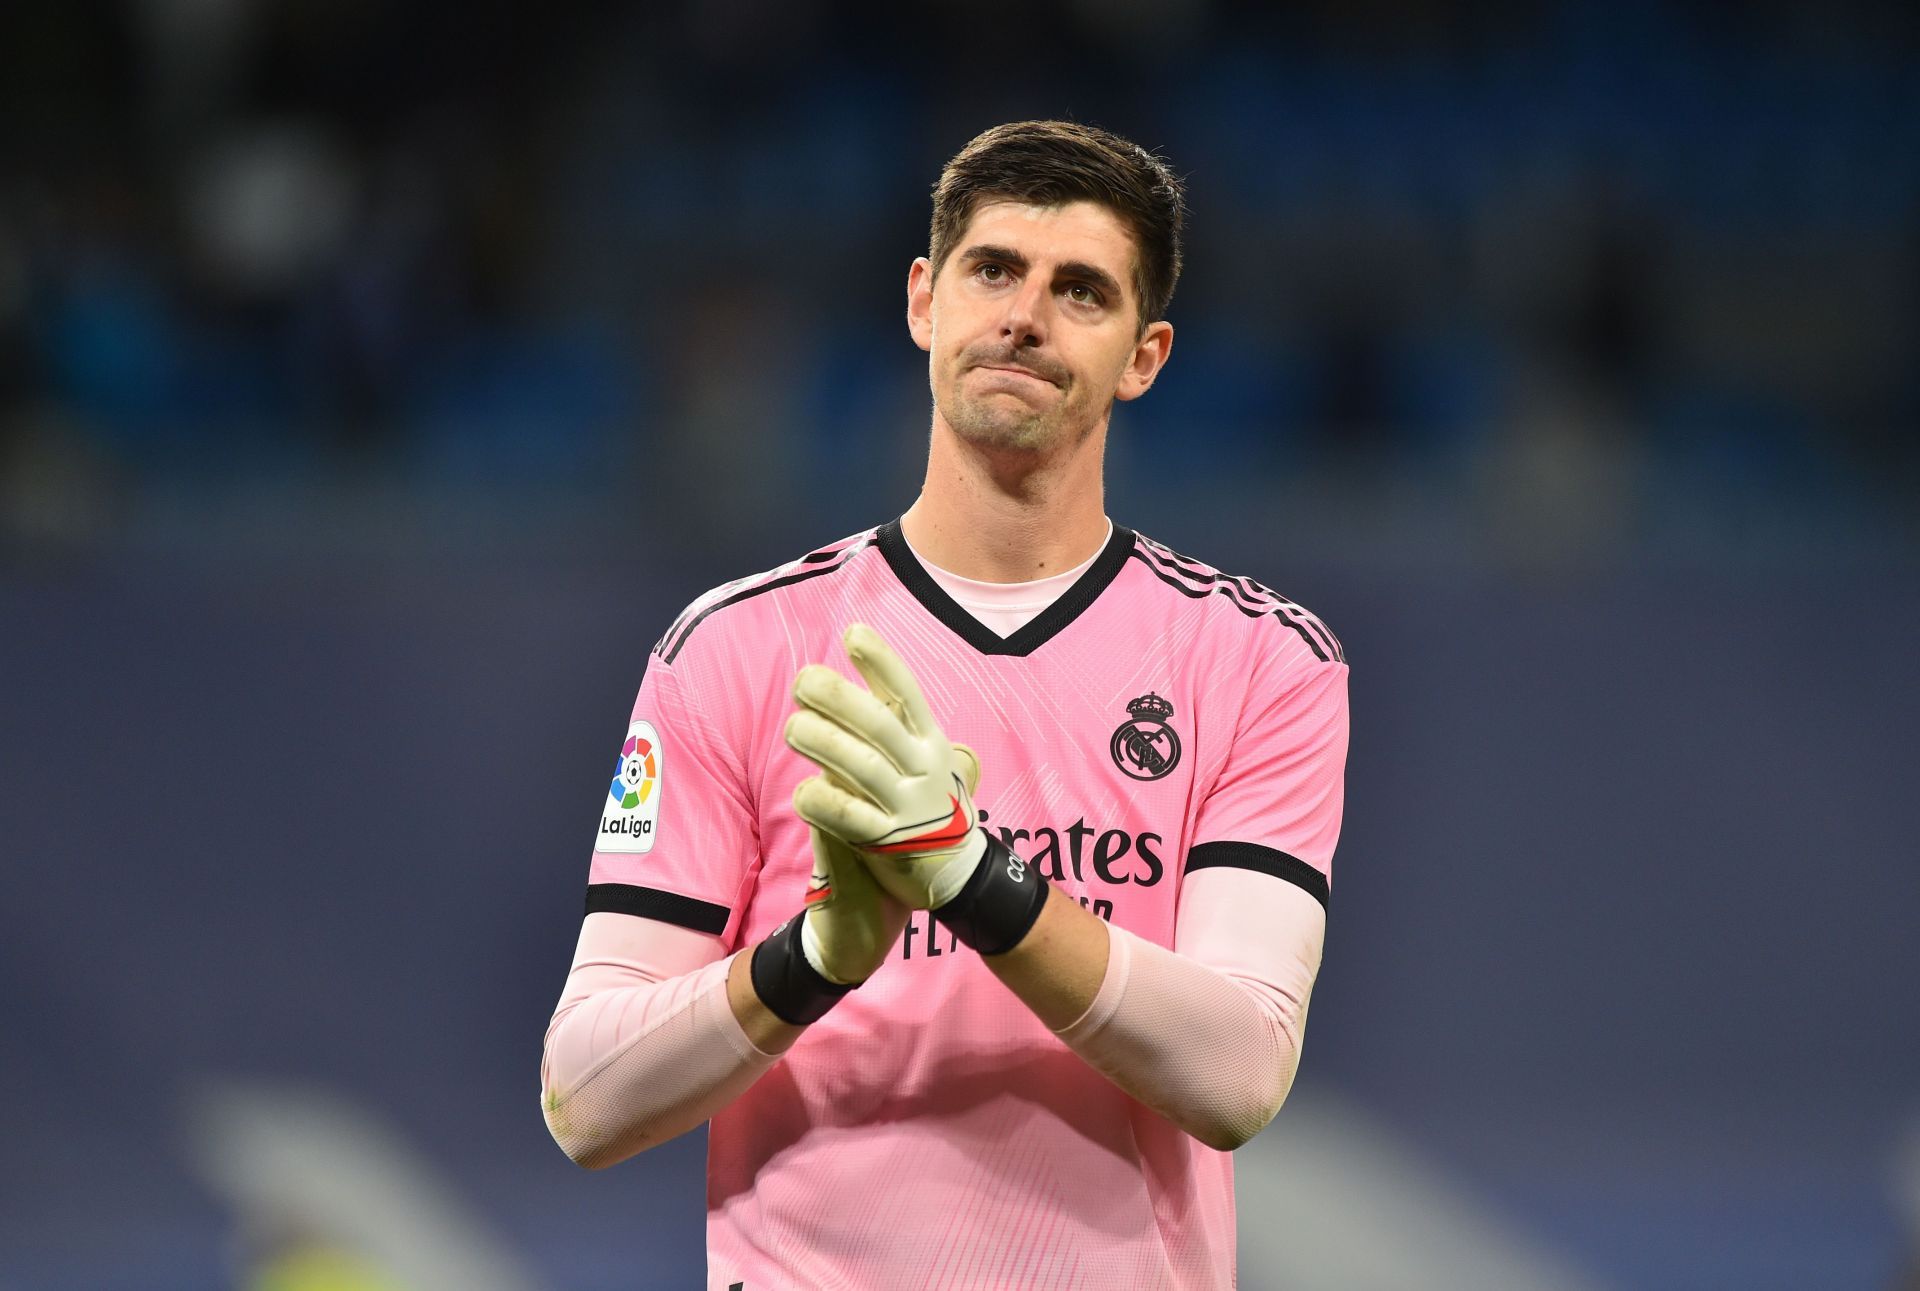 Thibaut Courtois was magnificent once again.